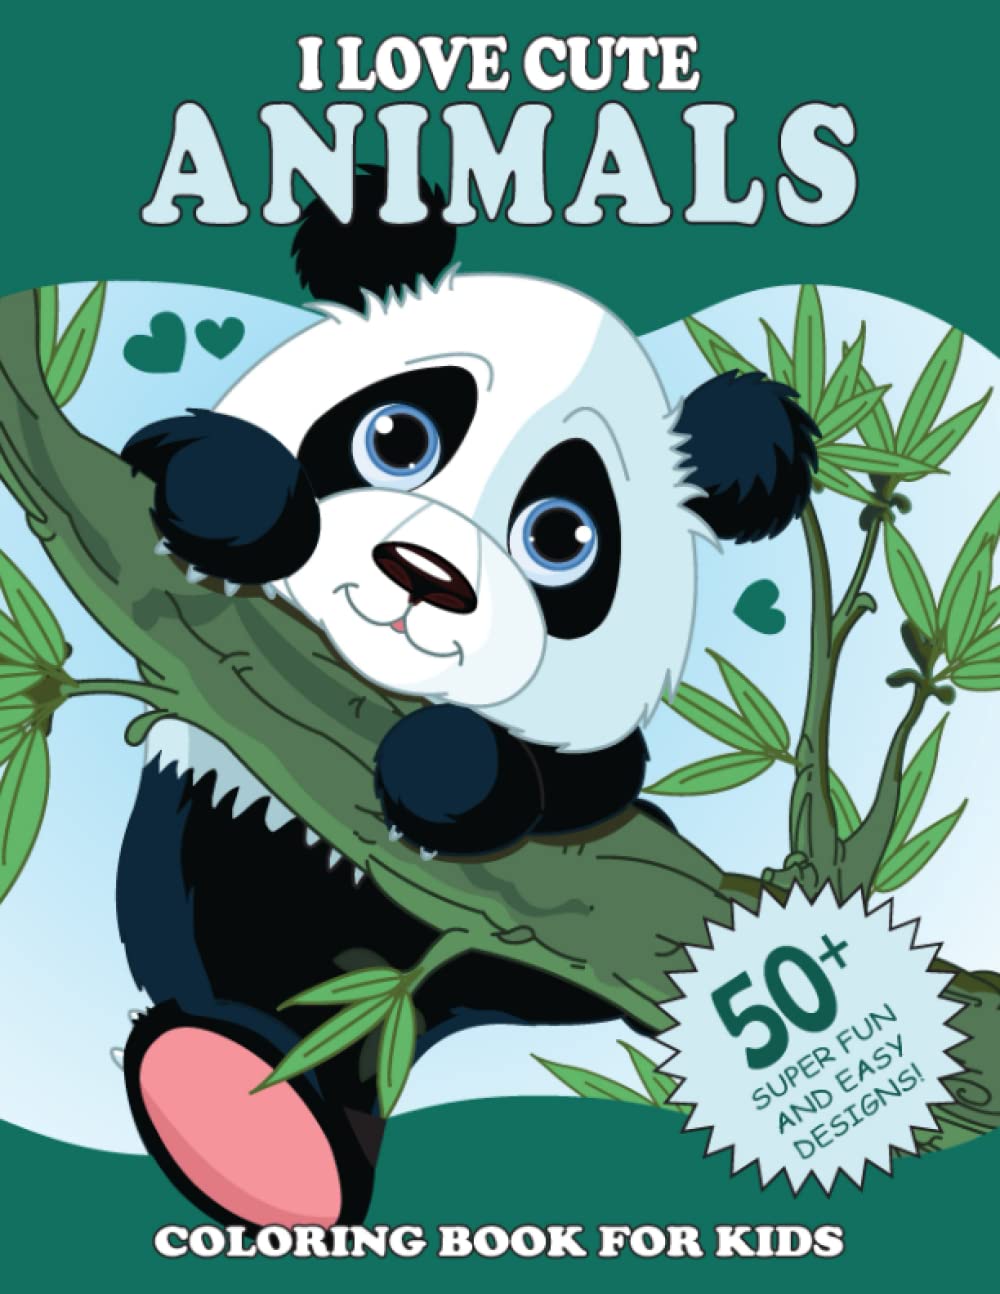 I Love Cute Animals Coloring Book for Kids: 50+ Super Fun and Easy Designs with Sloths, Llamas, Bears, Horses, Dolphins, Dogs, Cats, and More!